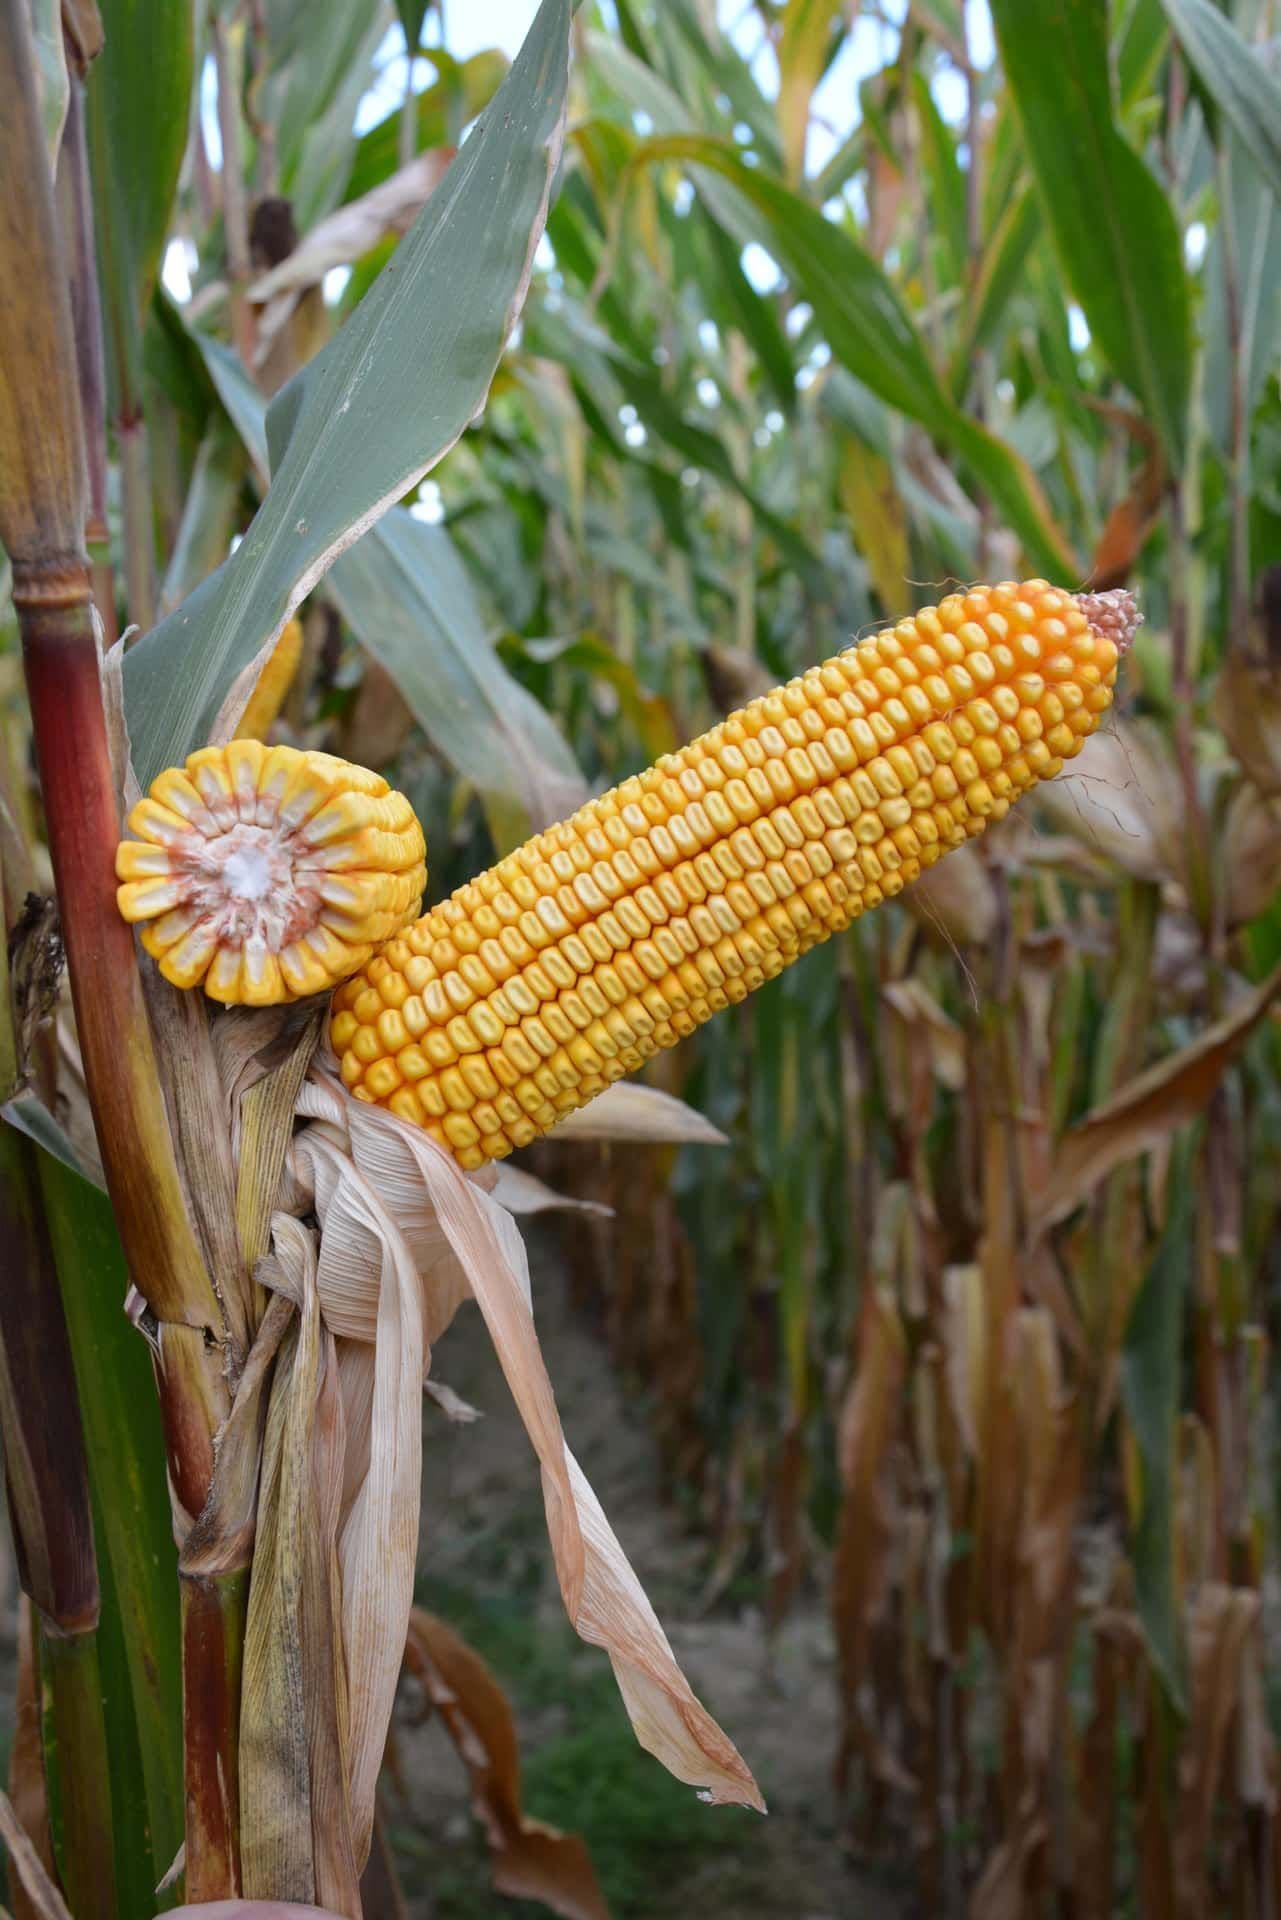 OLCANI
MID-EARLY MAIZE